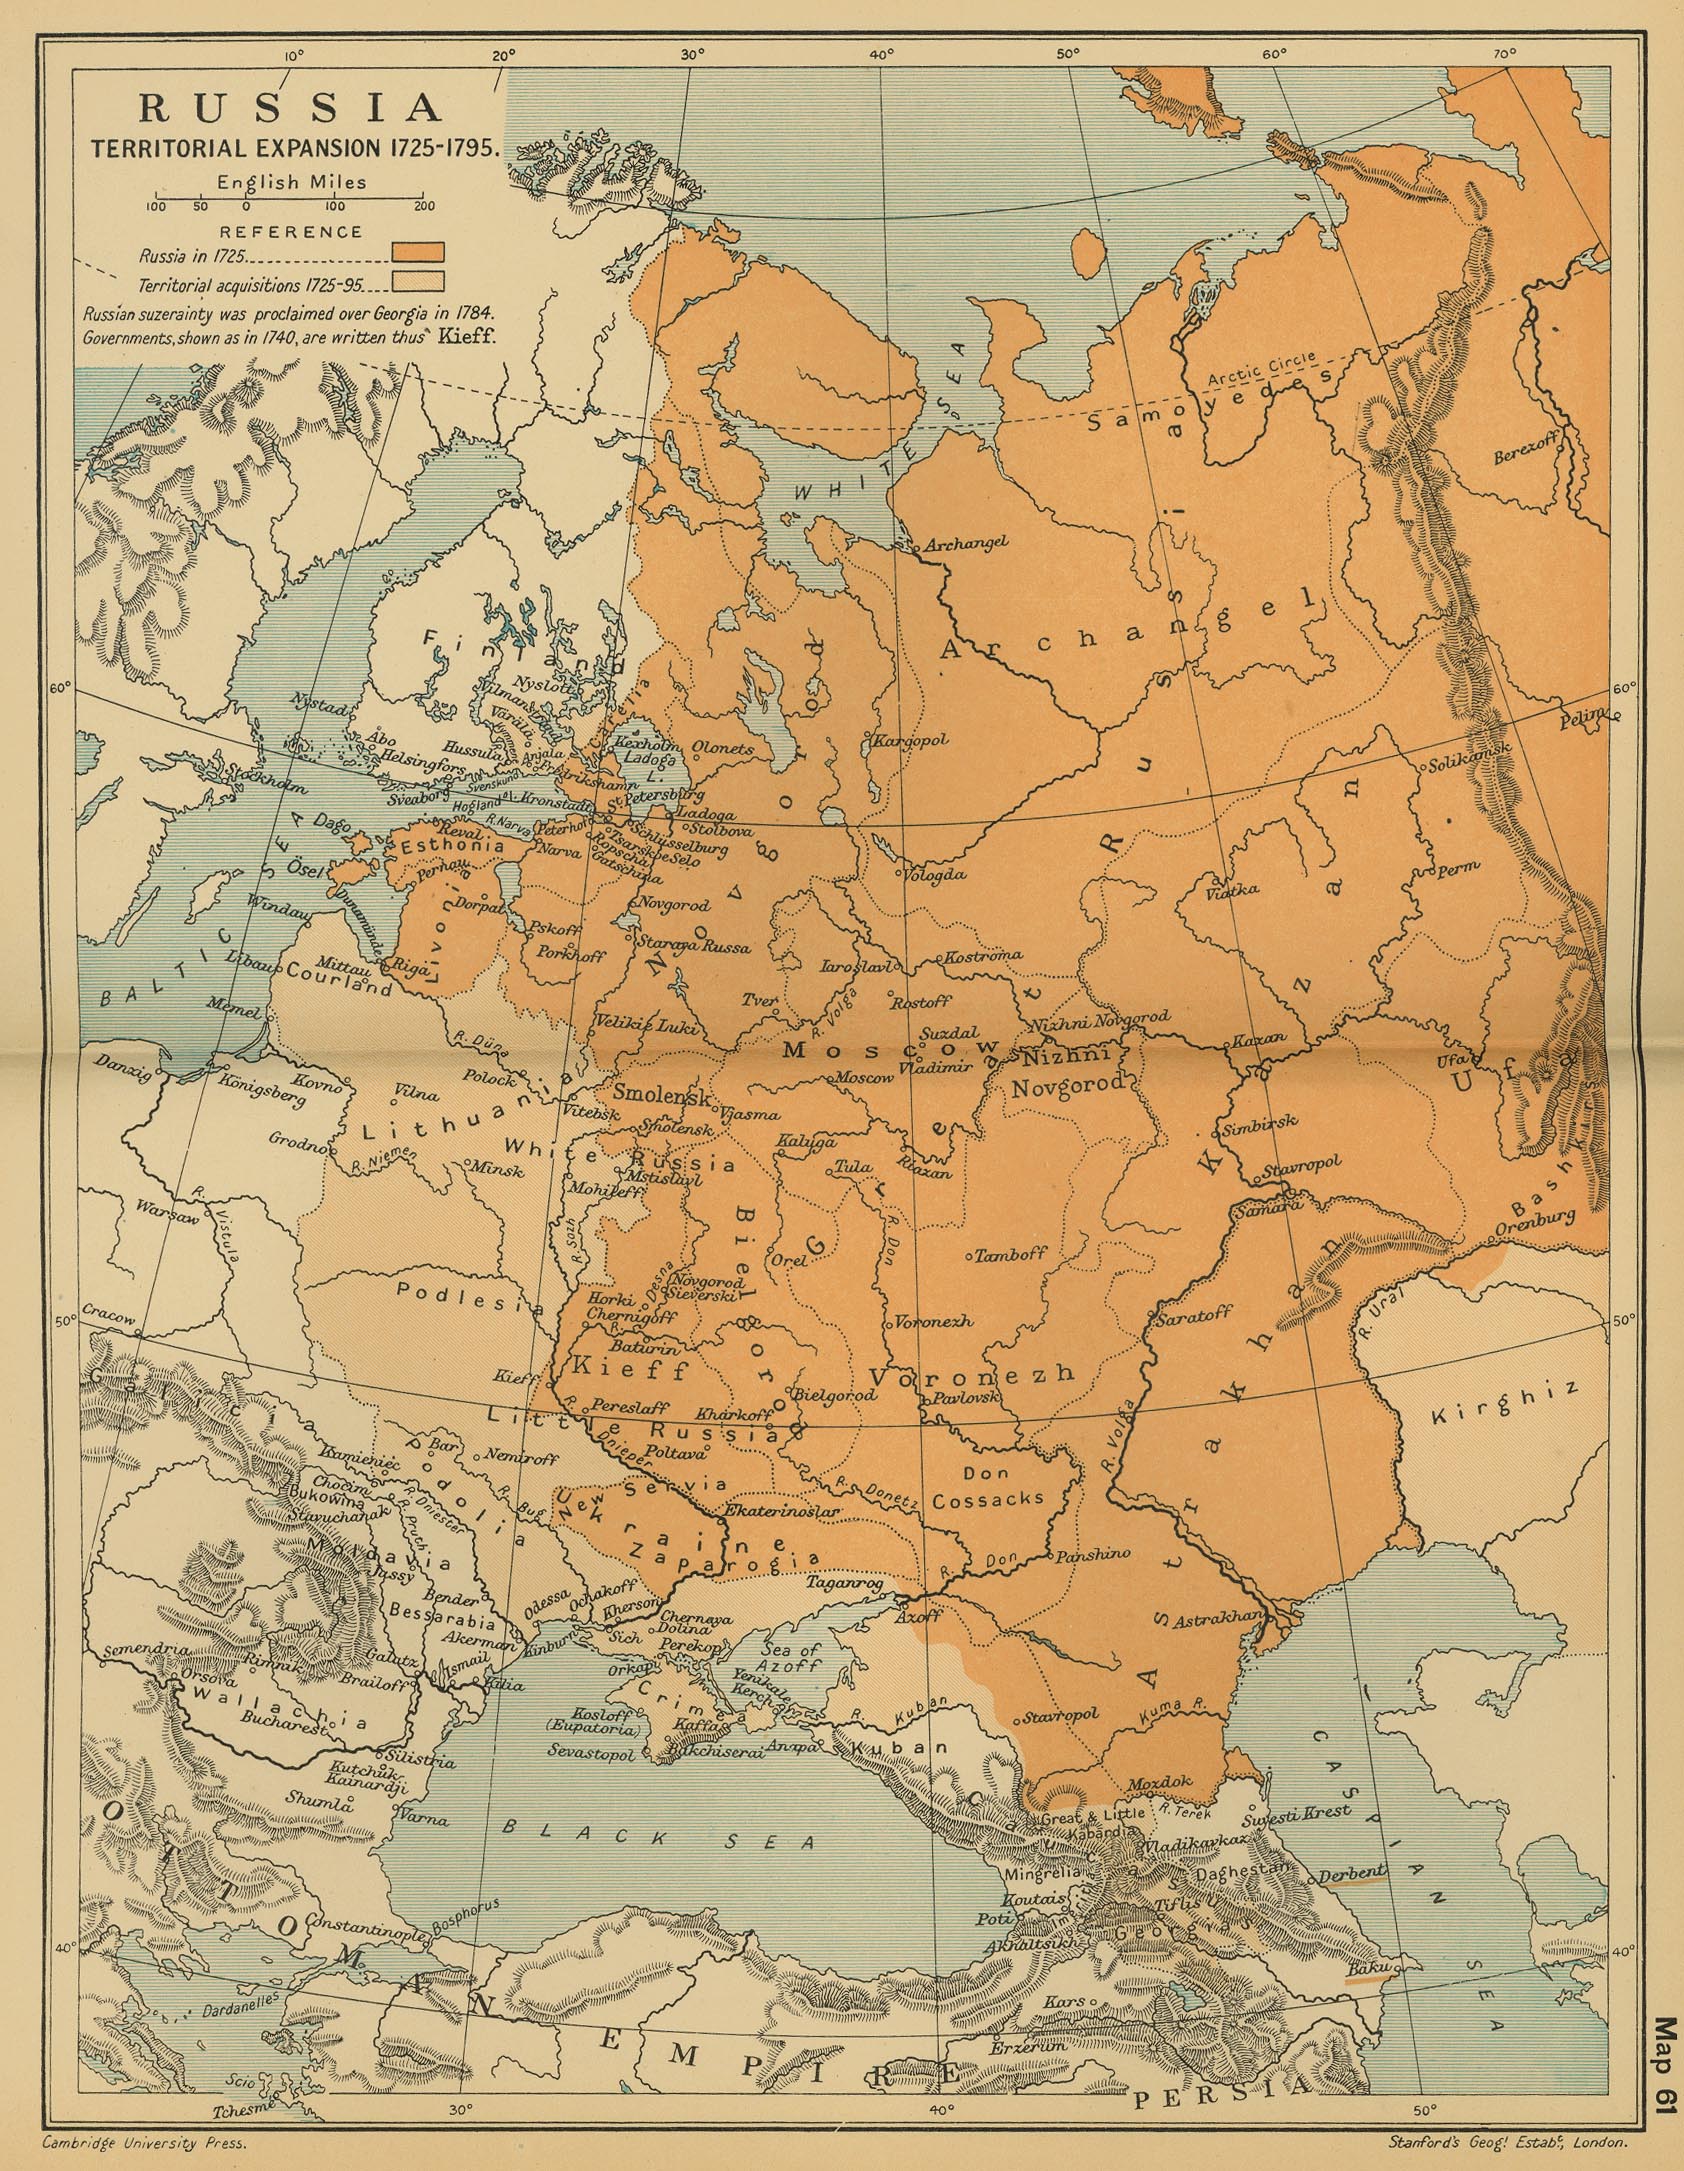 Russia: Territorial Expansion, 1725-1795.